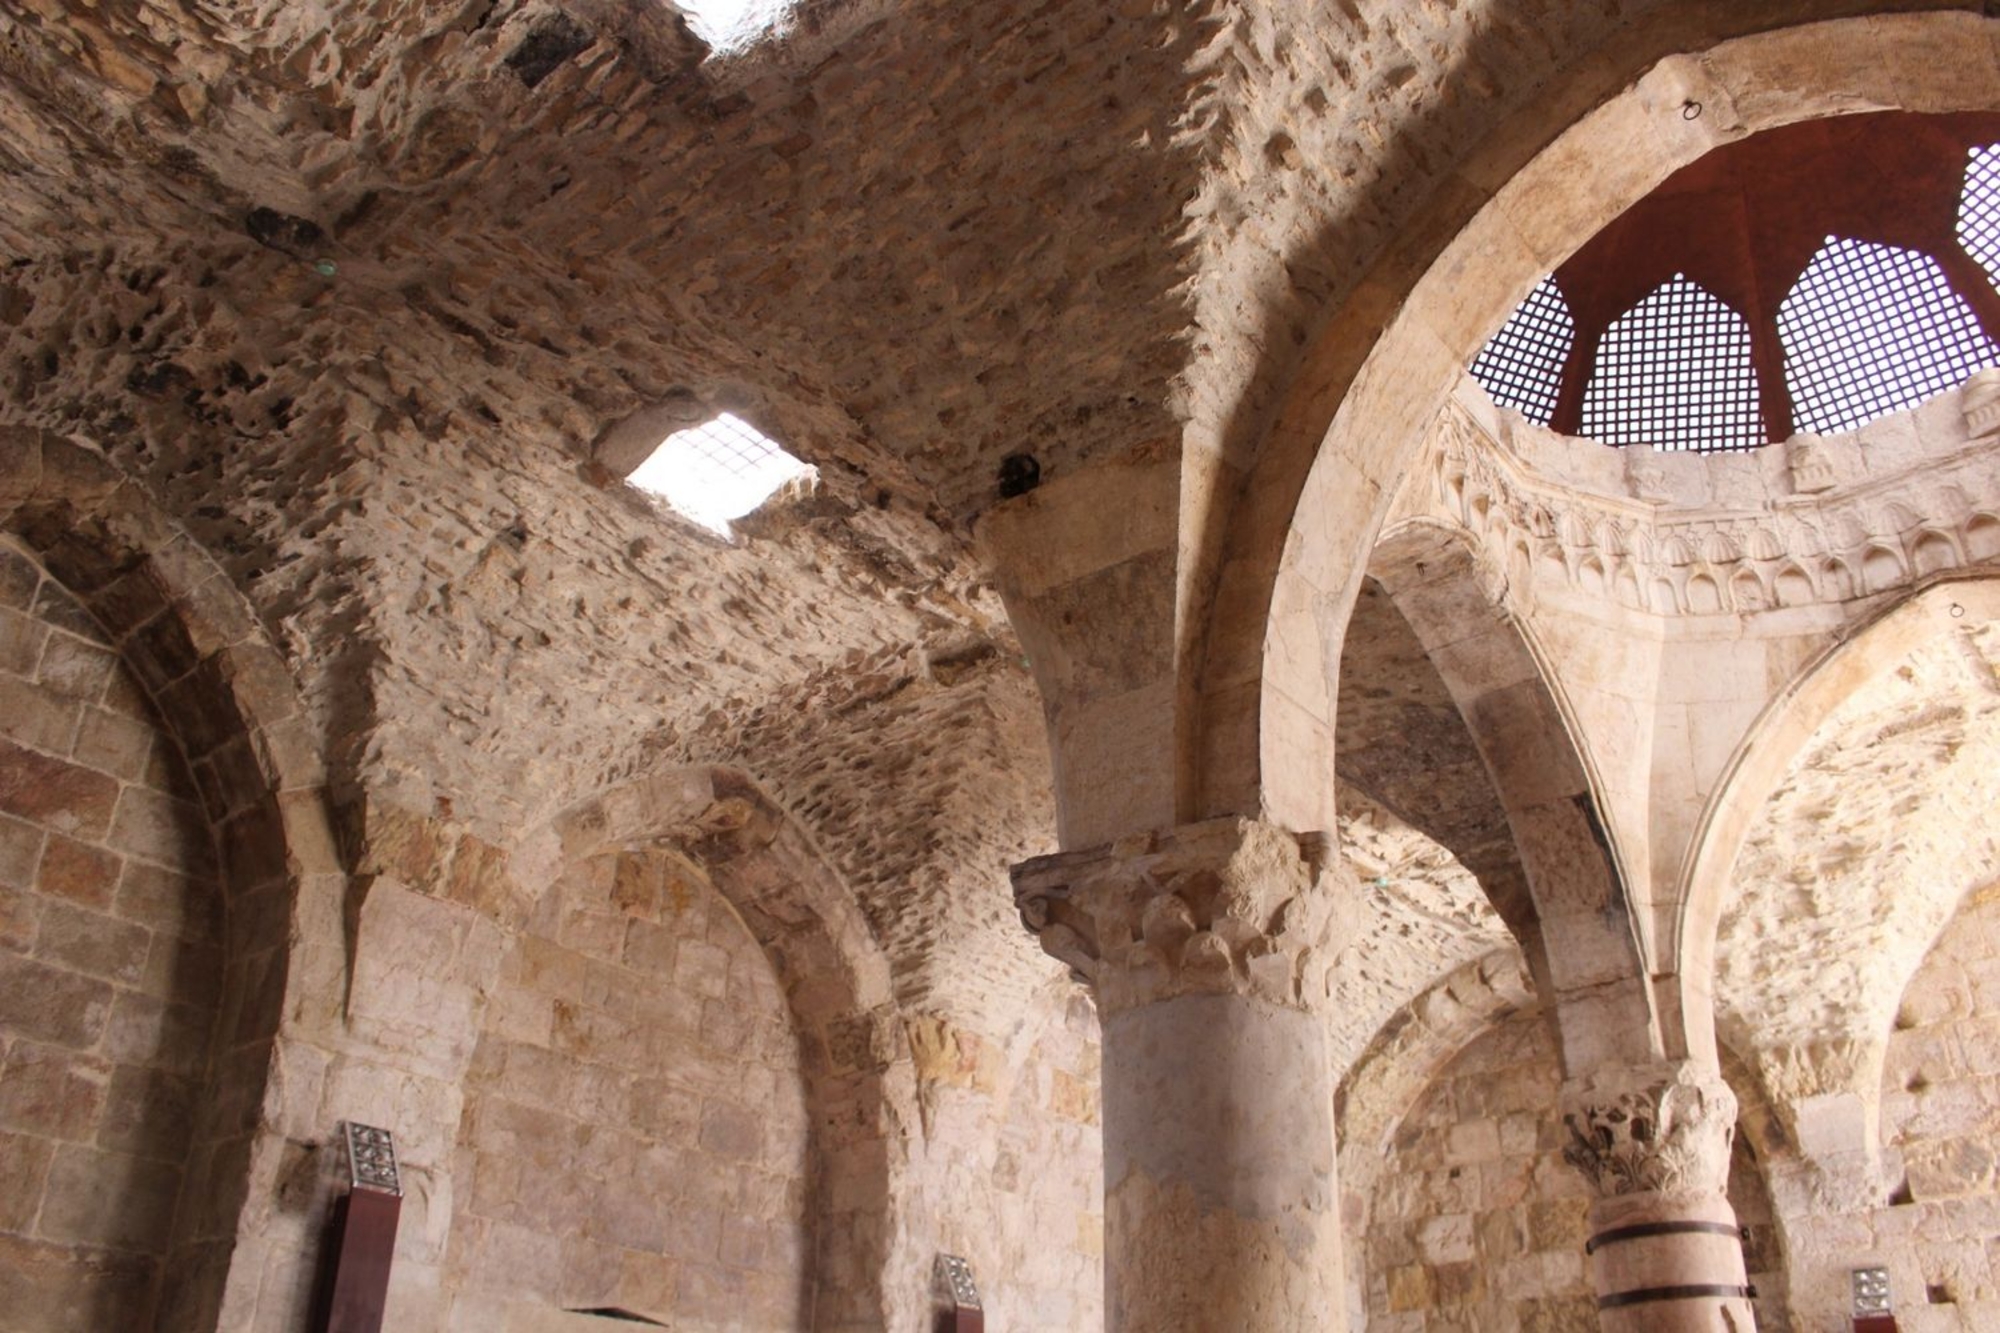 Photograph of the interior of the Krak des Chevaliers